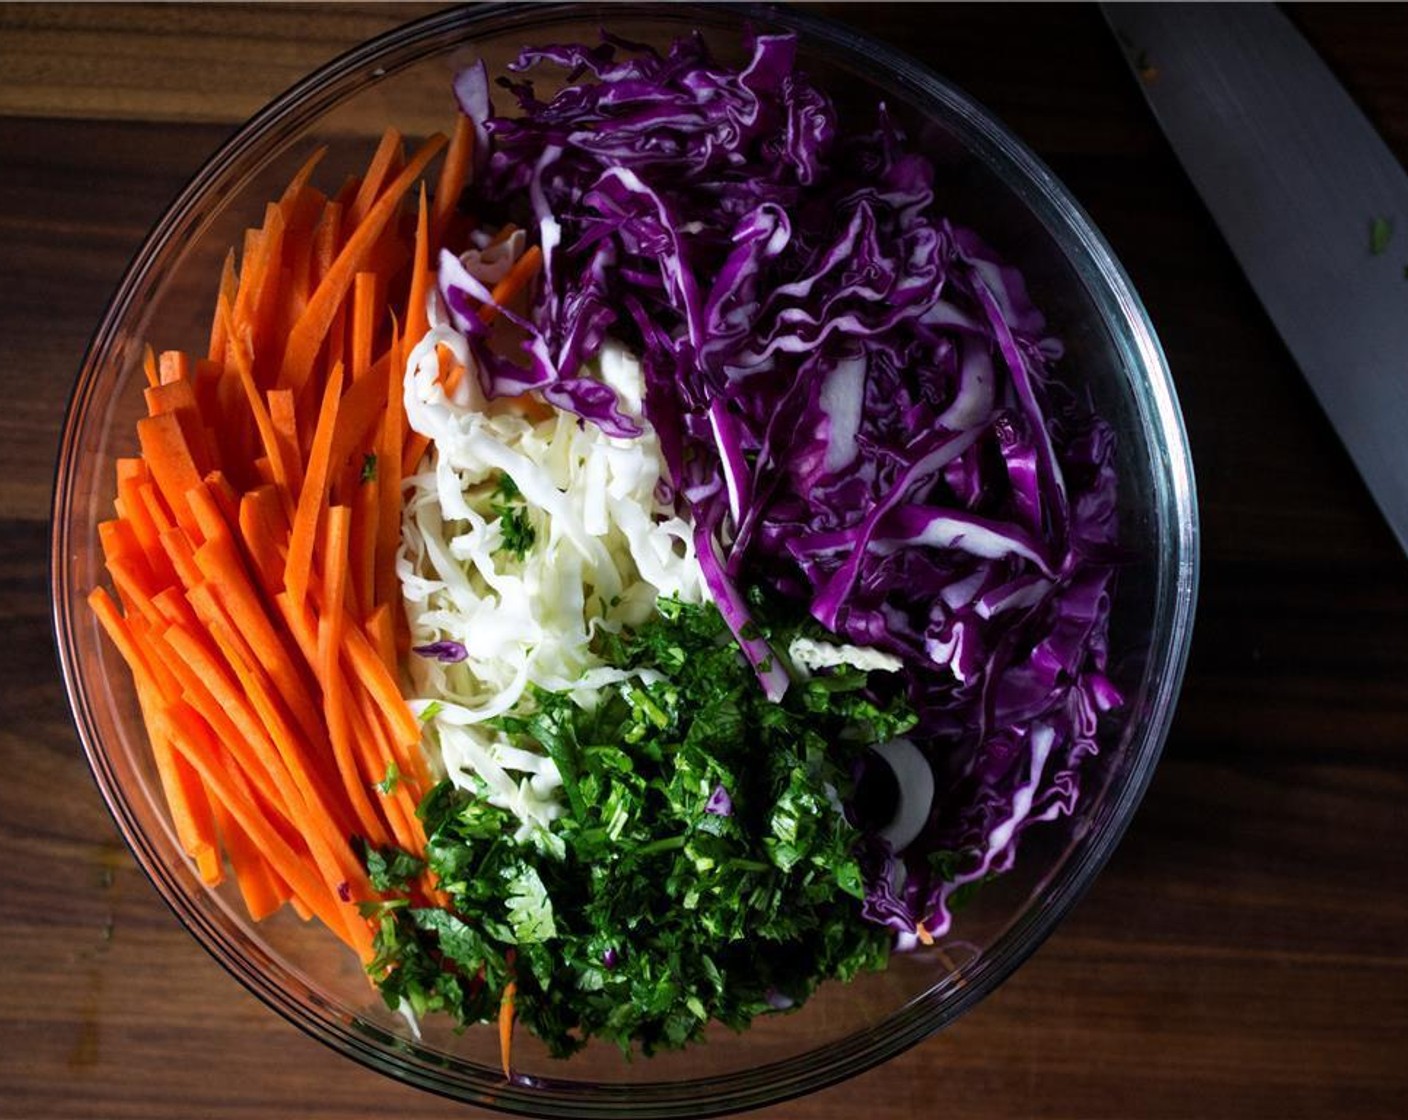 step 1 In a large mixing bowl, add Red Cabbage (1 cup), Green Cabbage (1 cup), Carrots (2), and Fresh Cilantro (1/2 cup).